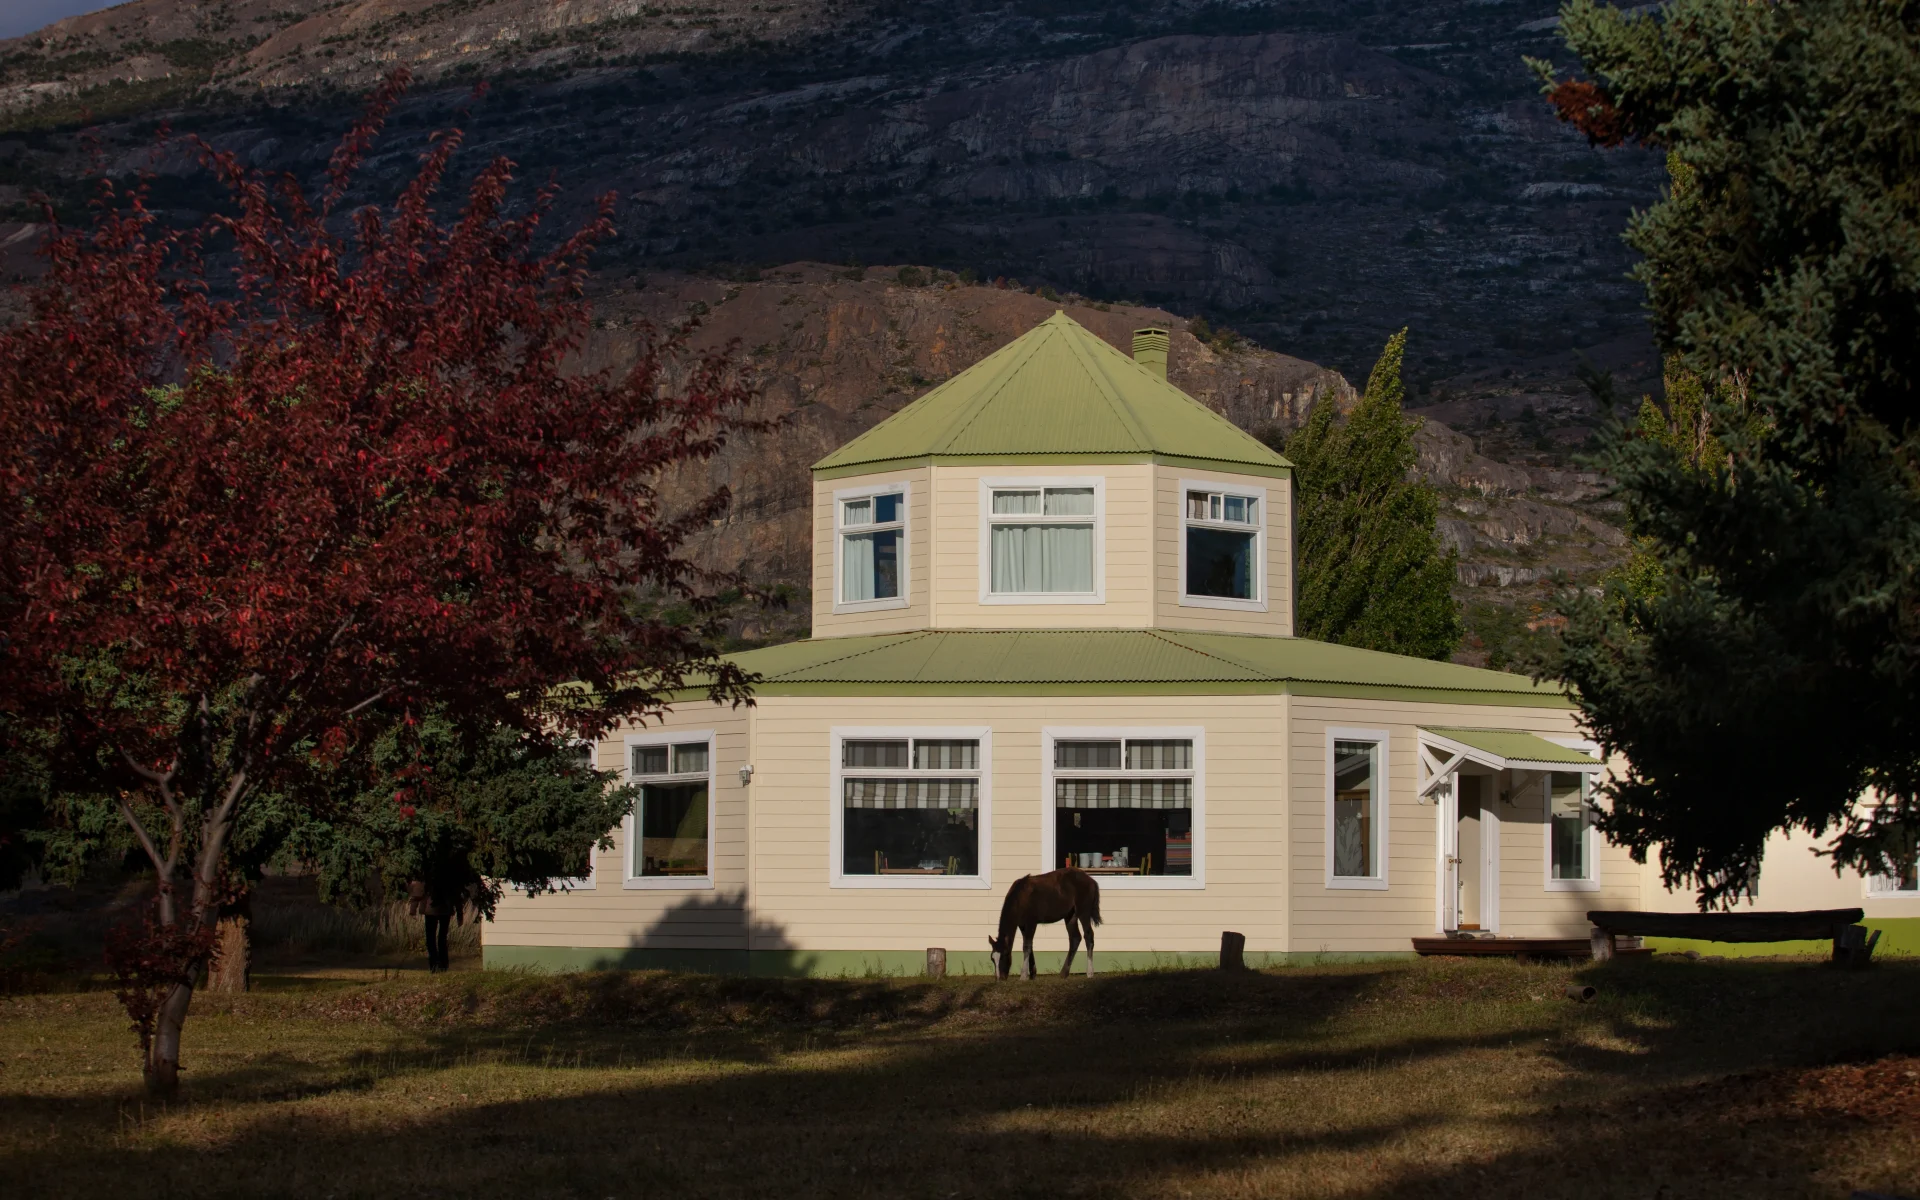 The architecture of Estancia Cristina is octagonal with green roofing. A horse stands ahead of the building besides autumnal trees.